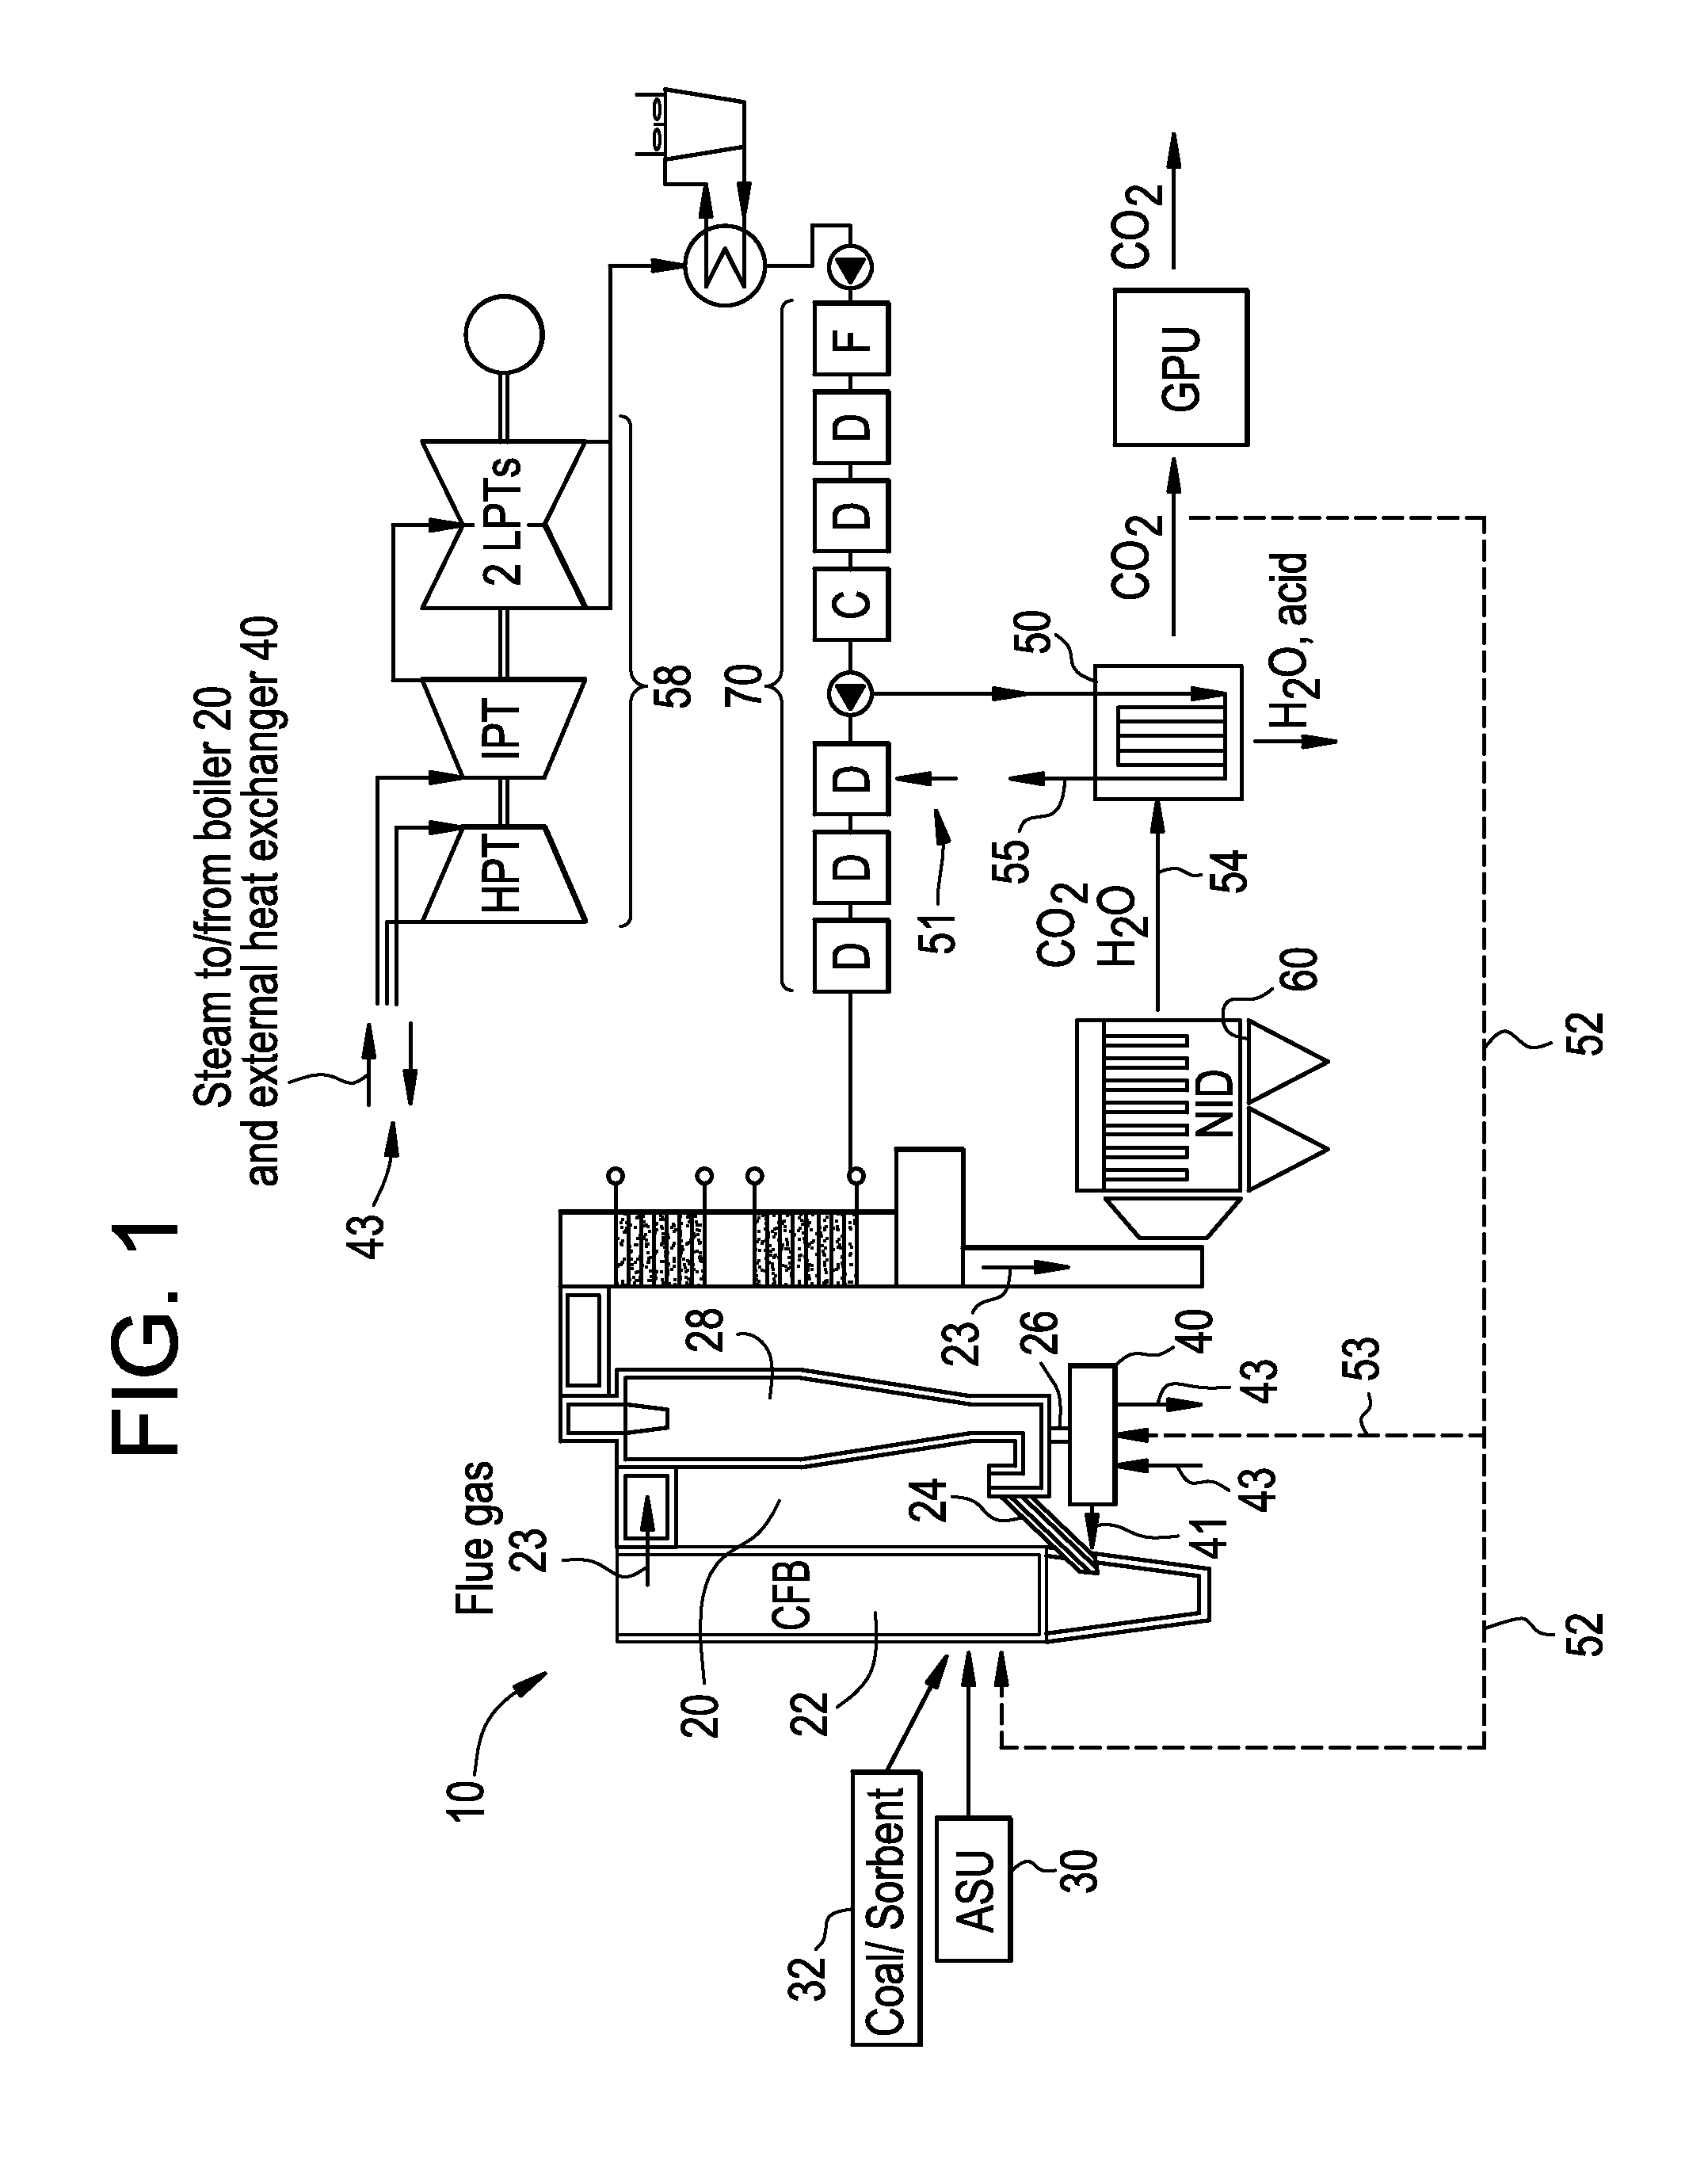 Pressurized oxy-combustion power boiler and power plant and method of operating the same